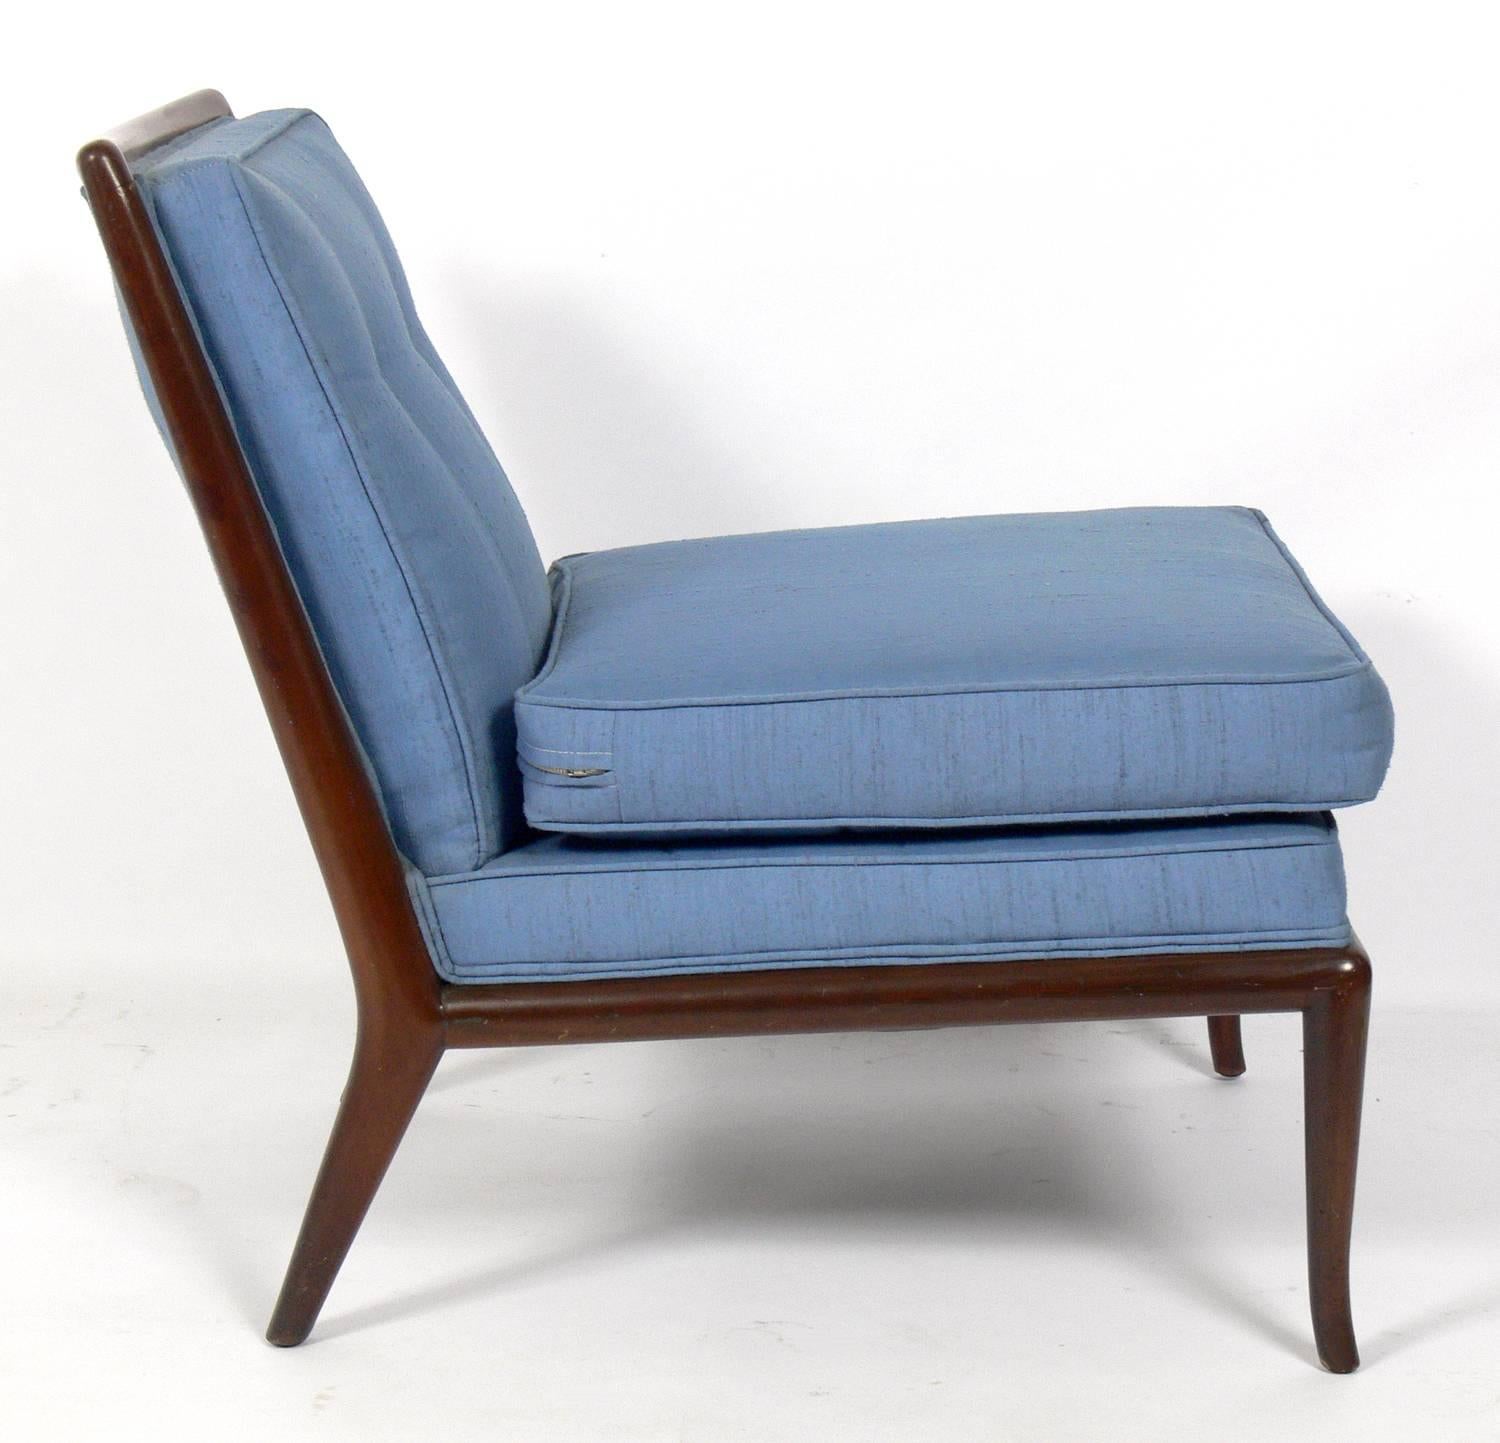 Modernist slipper chair, designed by T.H. Robsjohn-Gibbings for Widdicomb, circa 1950s. As with all of Gibbings' designs, this chair has elegant, clean lines that look good from any angle. This chair is currently being refinished and reupholstered